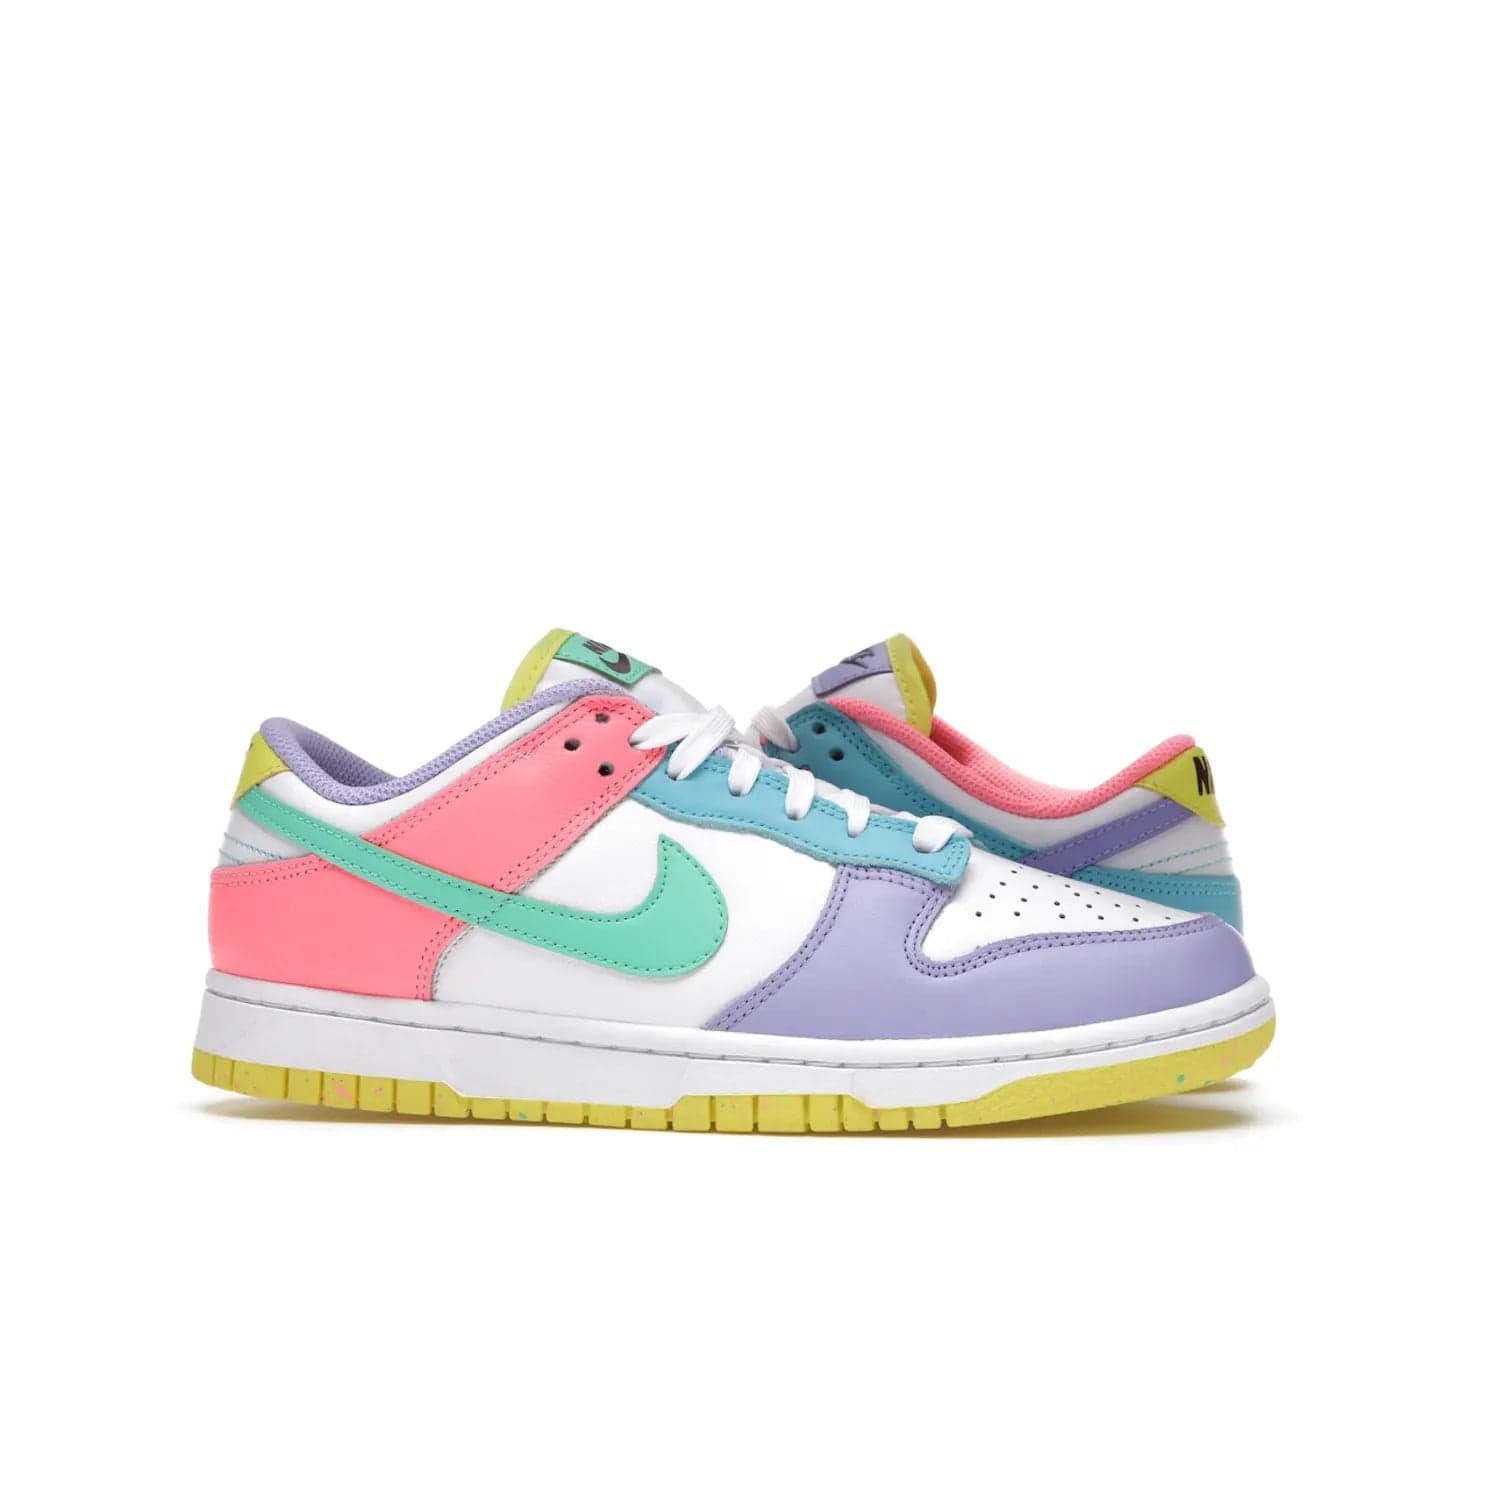 Nike Dunk Low SE Easter Candy (Women's) - Image 2 - Only at www.BallersClubKickz.com - UP
The Nike Dunk Low SE Easter Candy (Women's) brings a stylish touch to any outfit with its white leather upper, colorful accents, and multicolor speckle detailing. Shop now before they're gone.